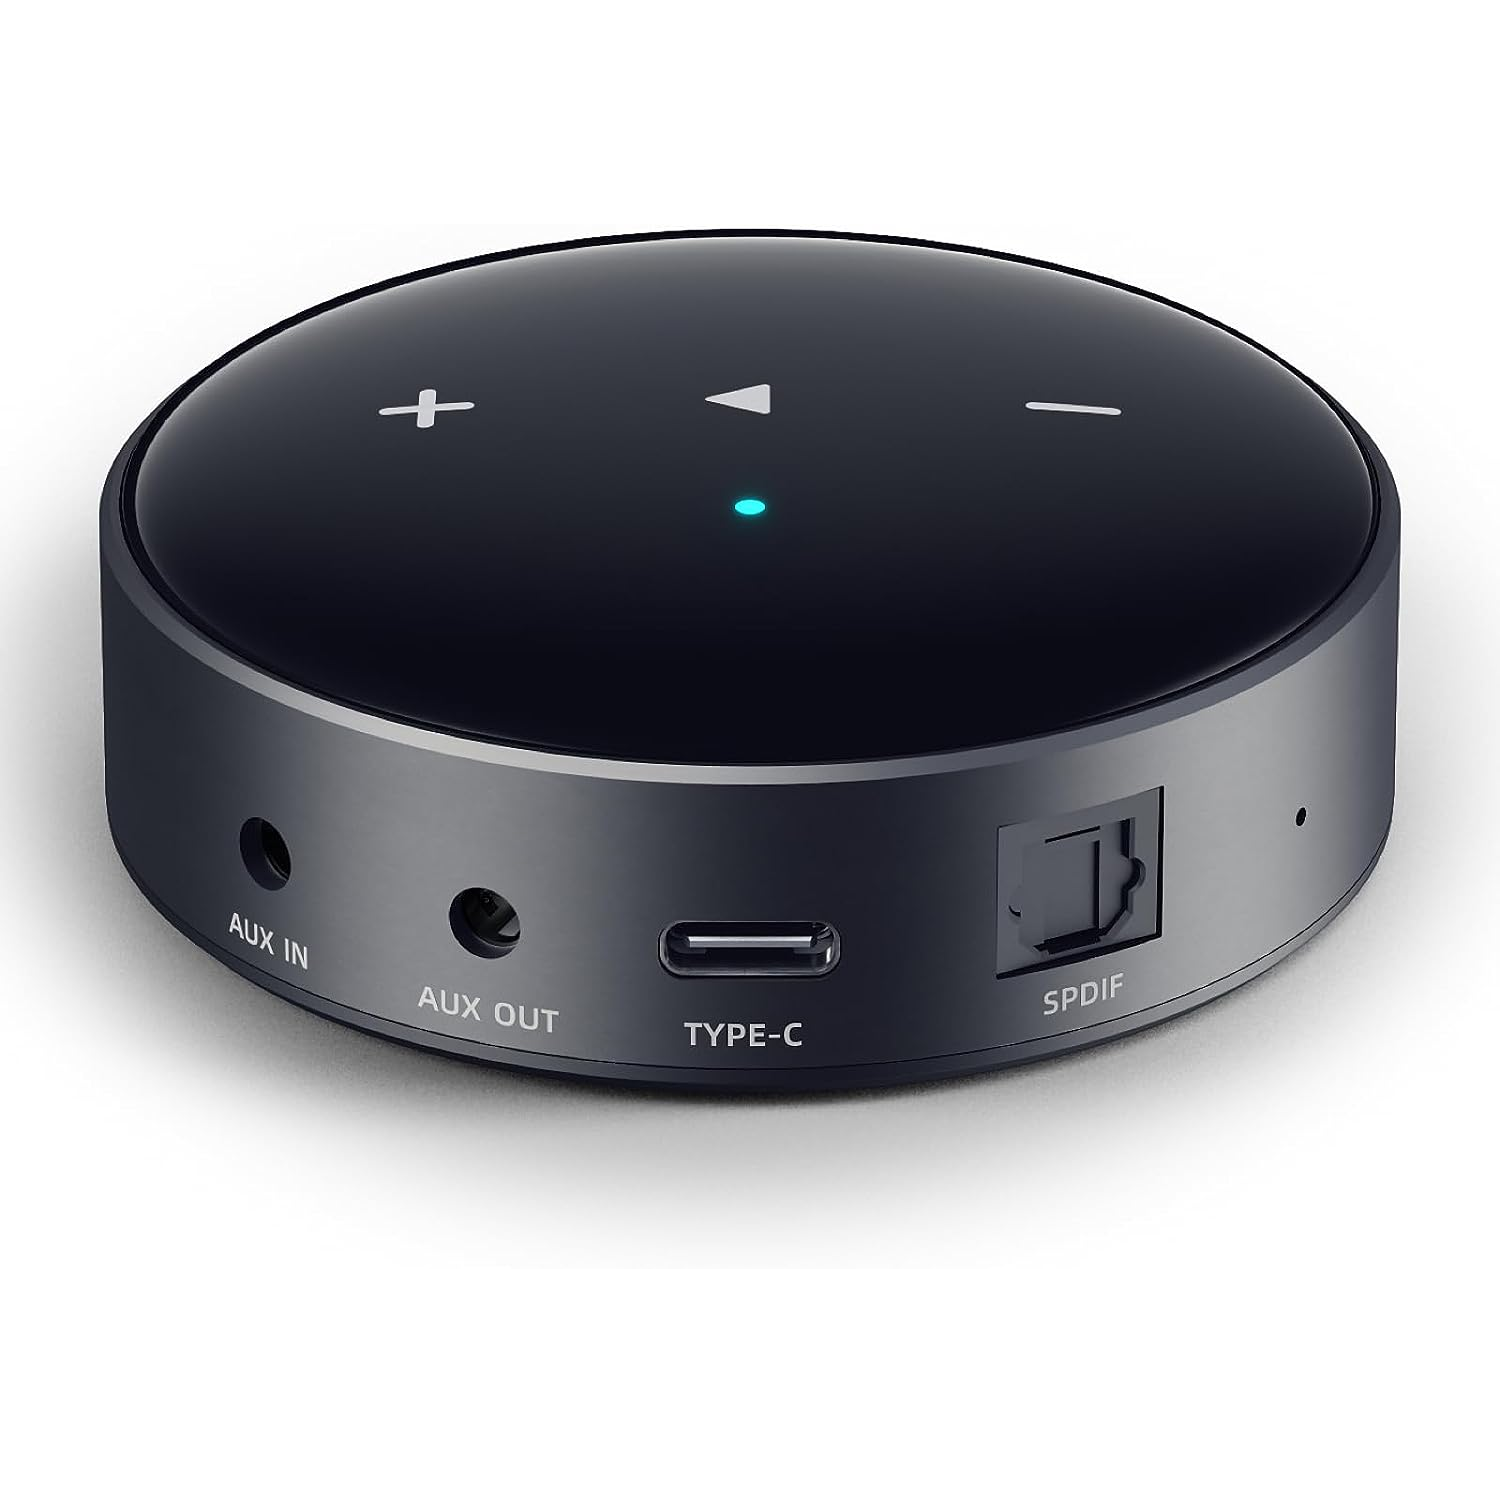 Wiim Pro+ Plus Wifi Streaming Player Audiophile HD Hi-Res Sound 24